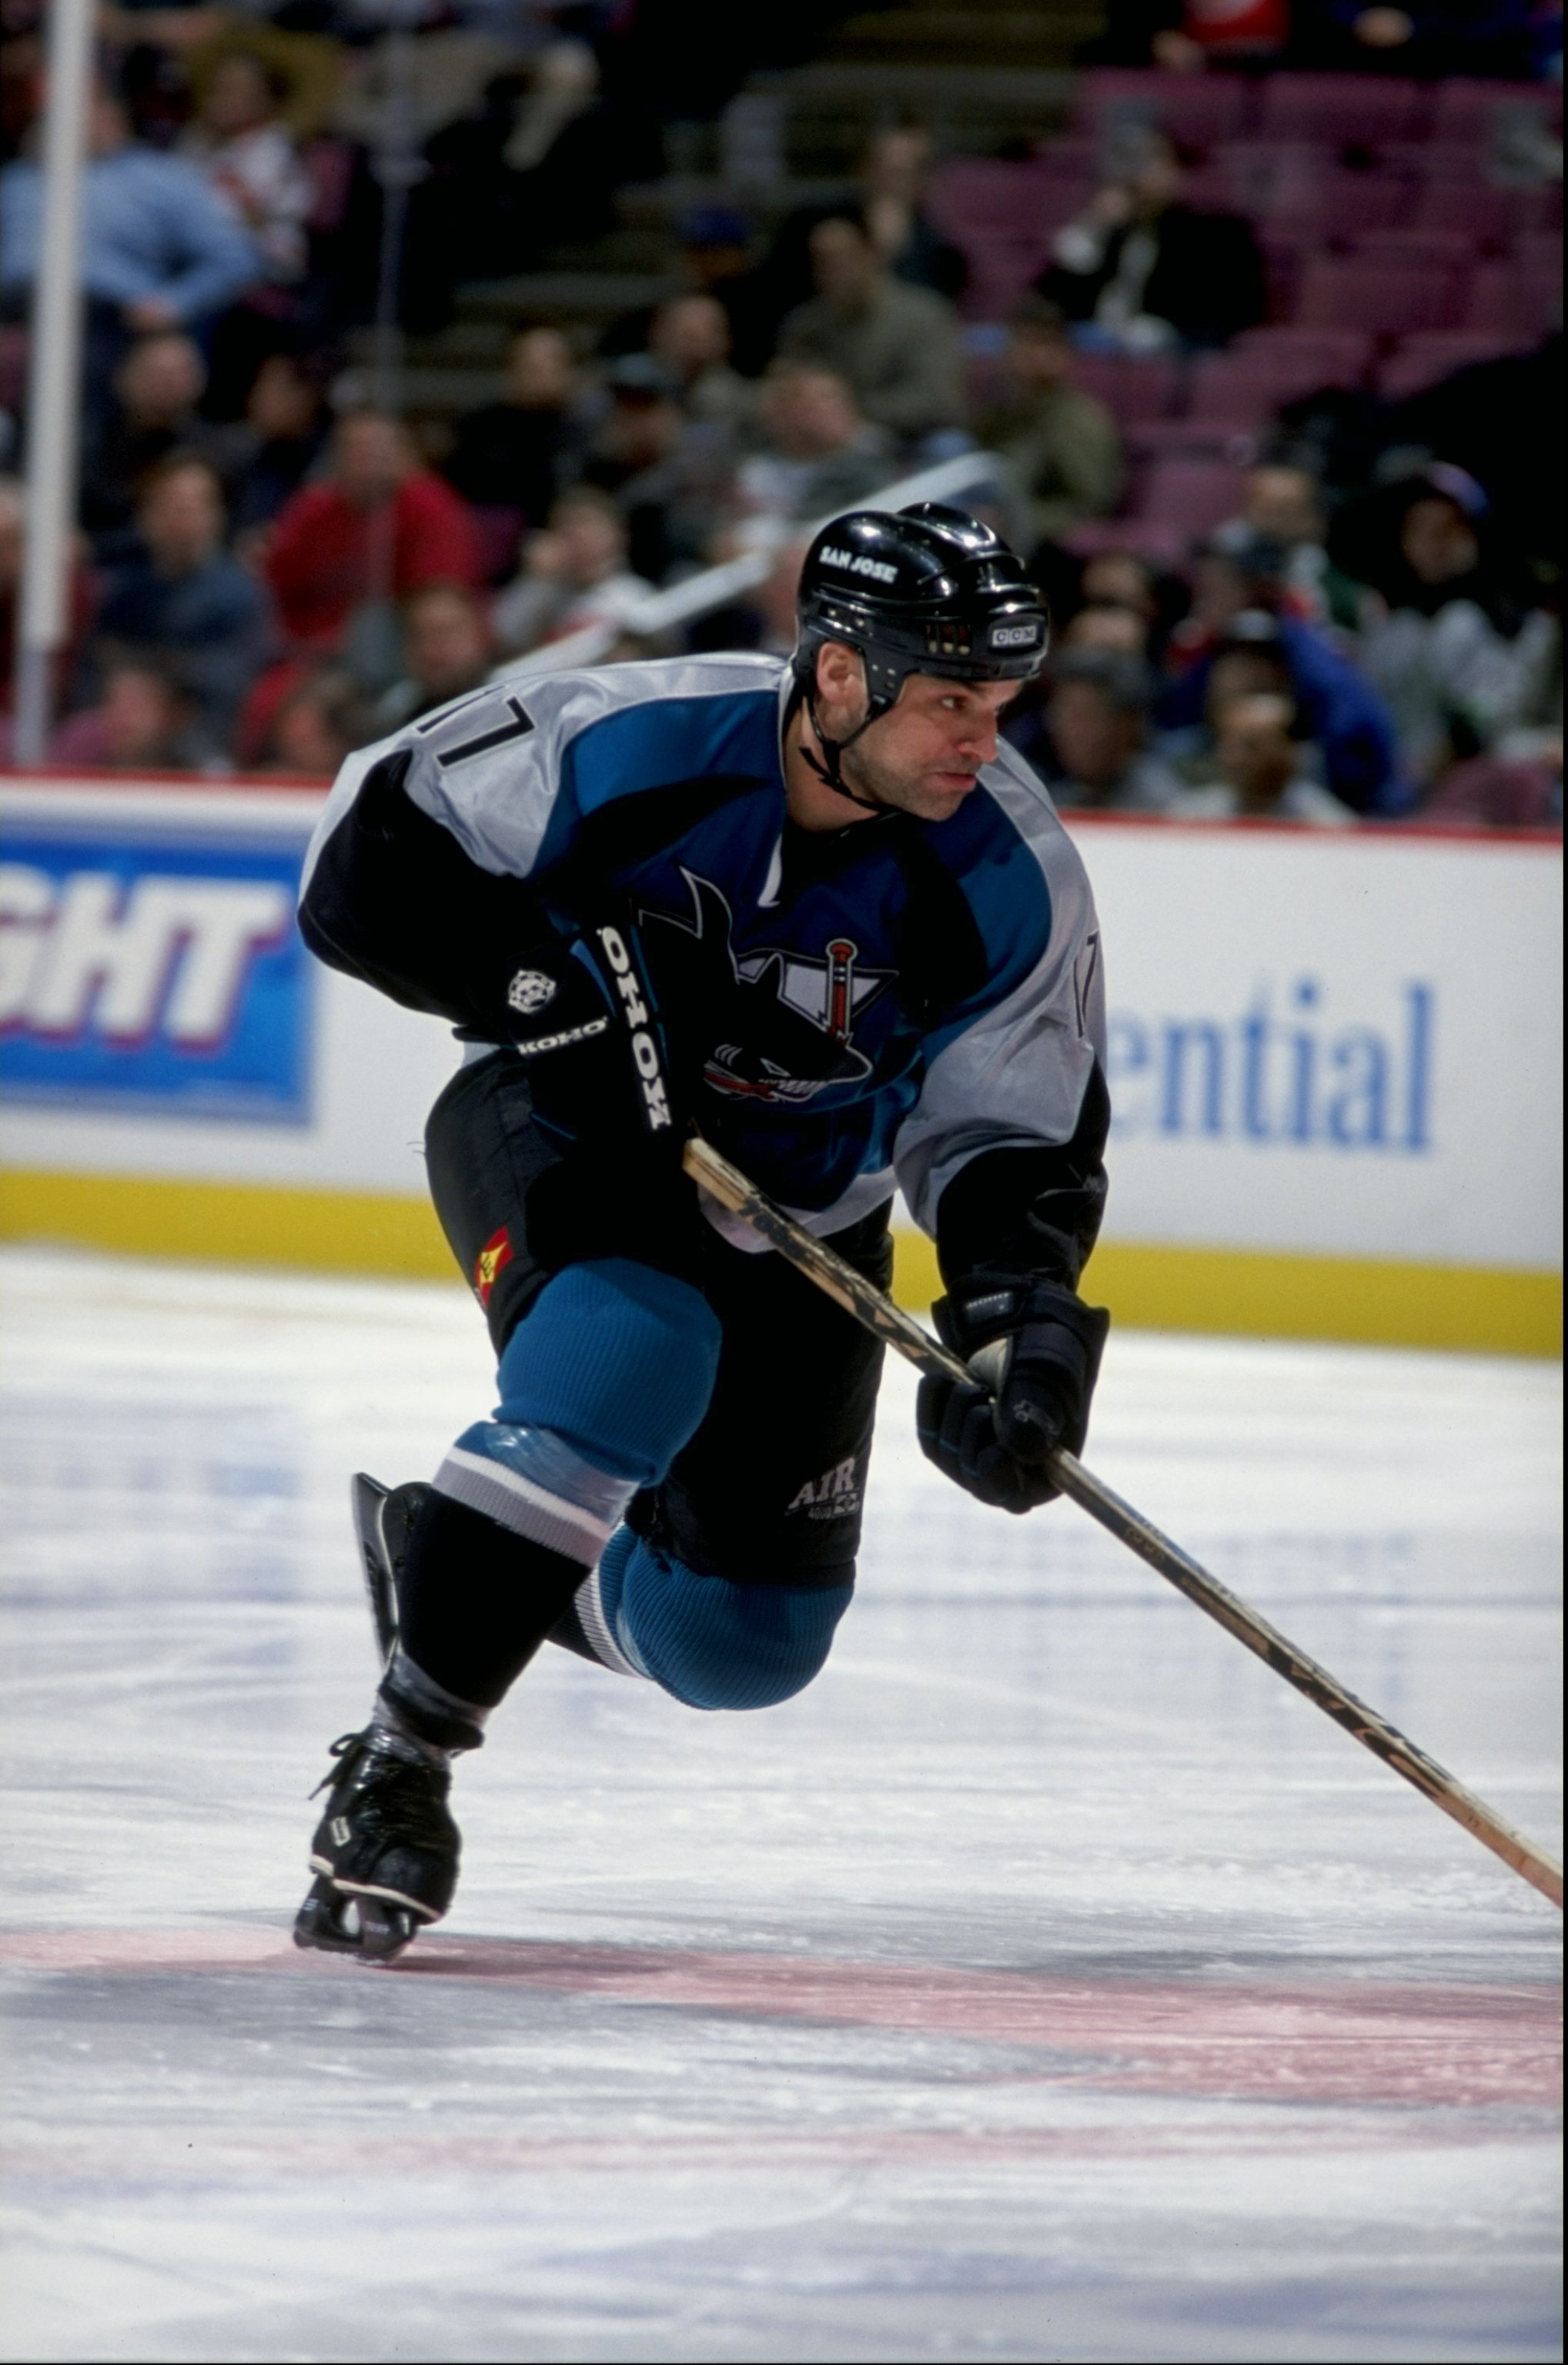 Which player who have played for the San Jose Sharks and 500+